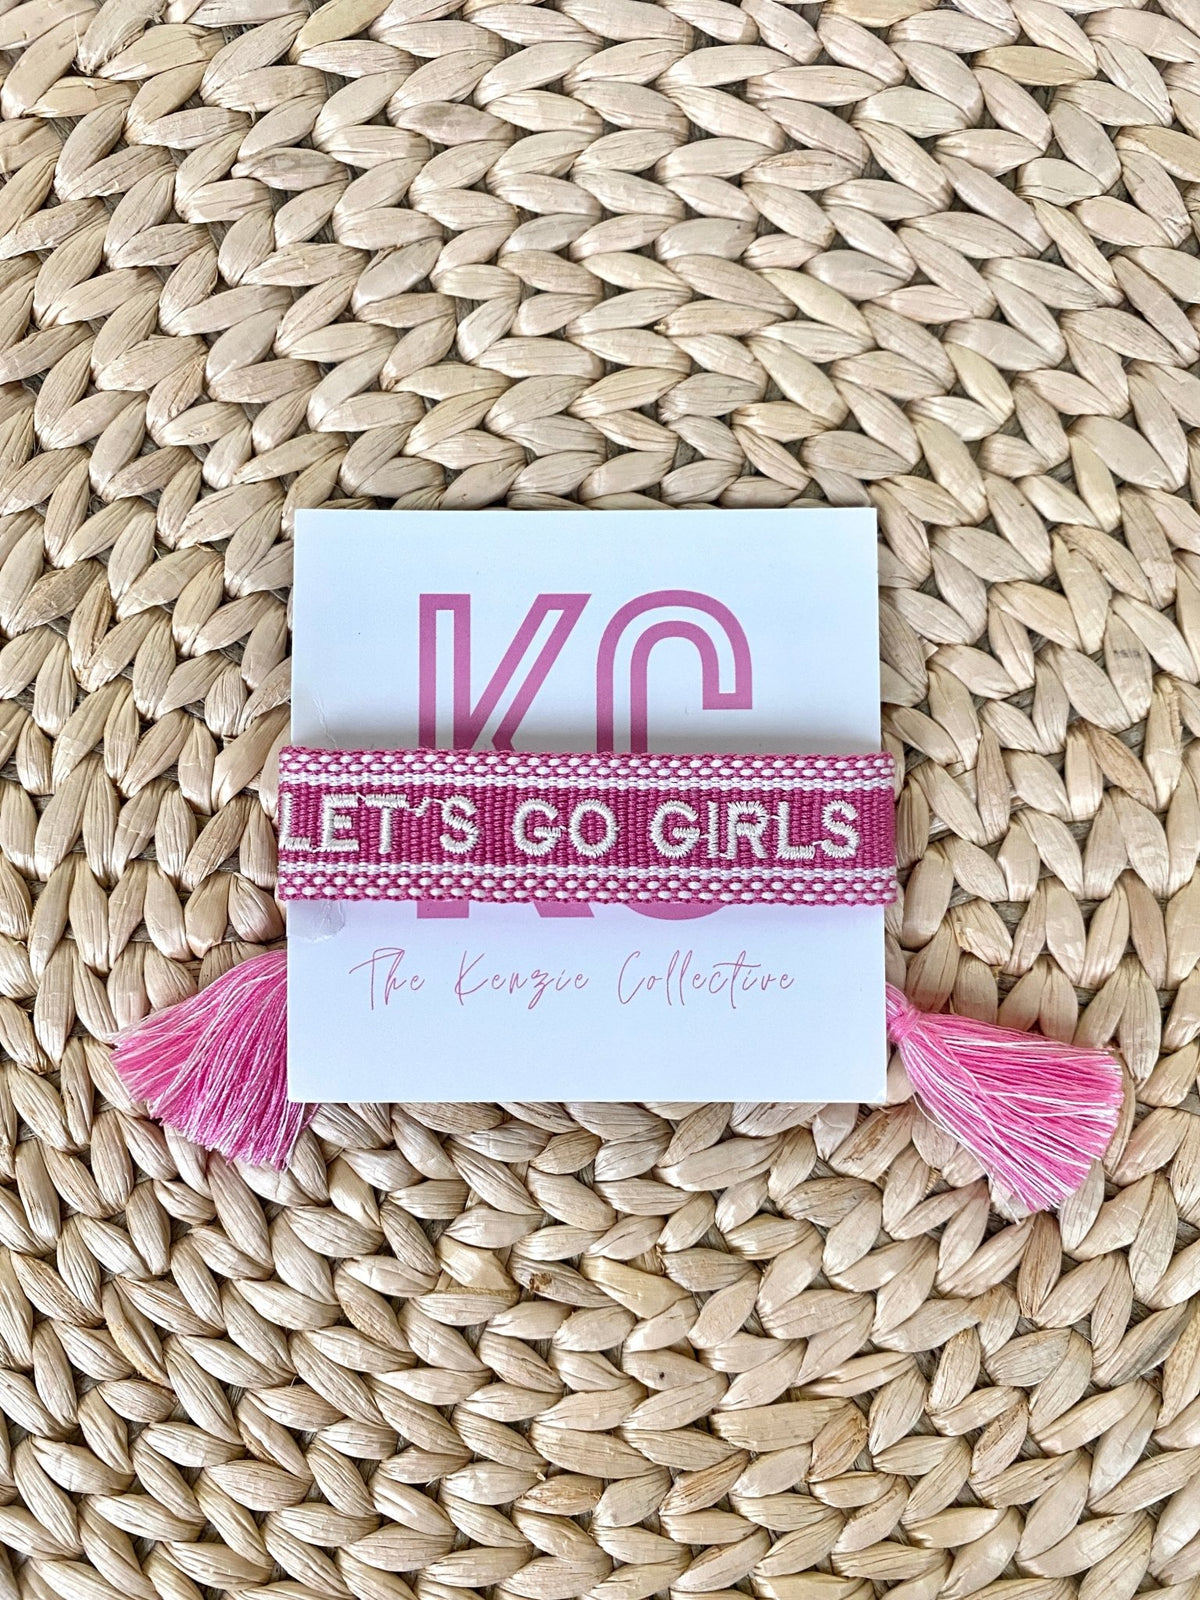 Lets go girls tassel bracelet pink - Stylish Bracelets - Affordable Jewelry and Belts at Lush Fashion Lounge Boutique in Oklahoma City